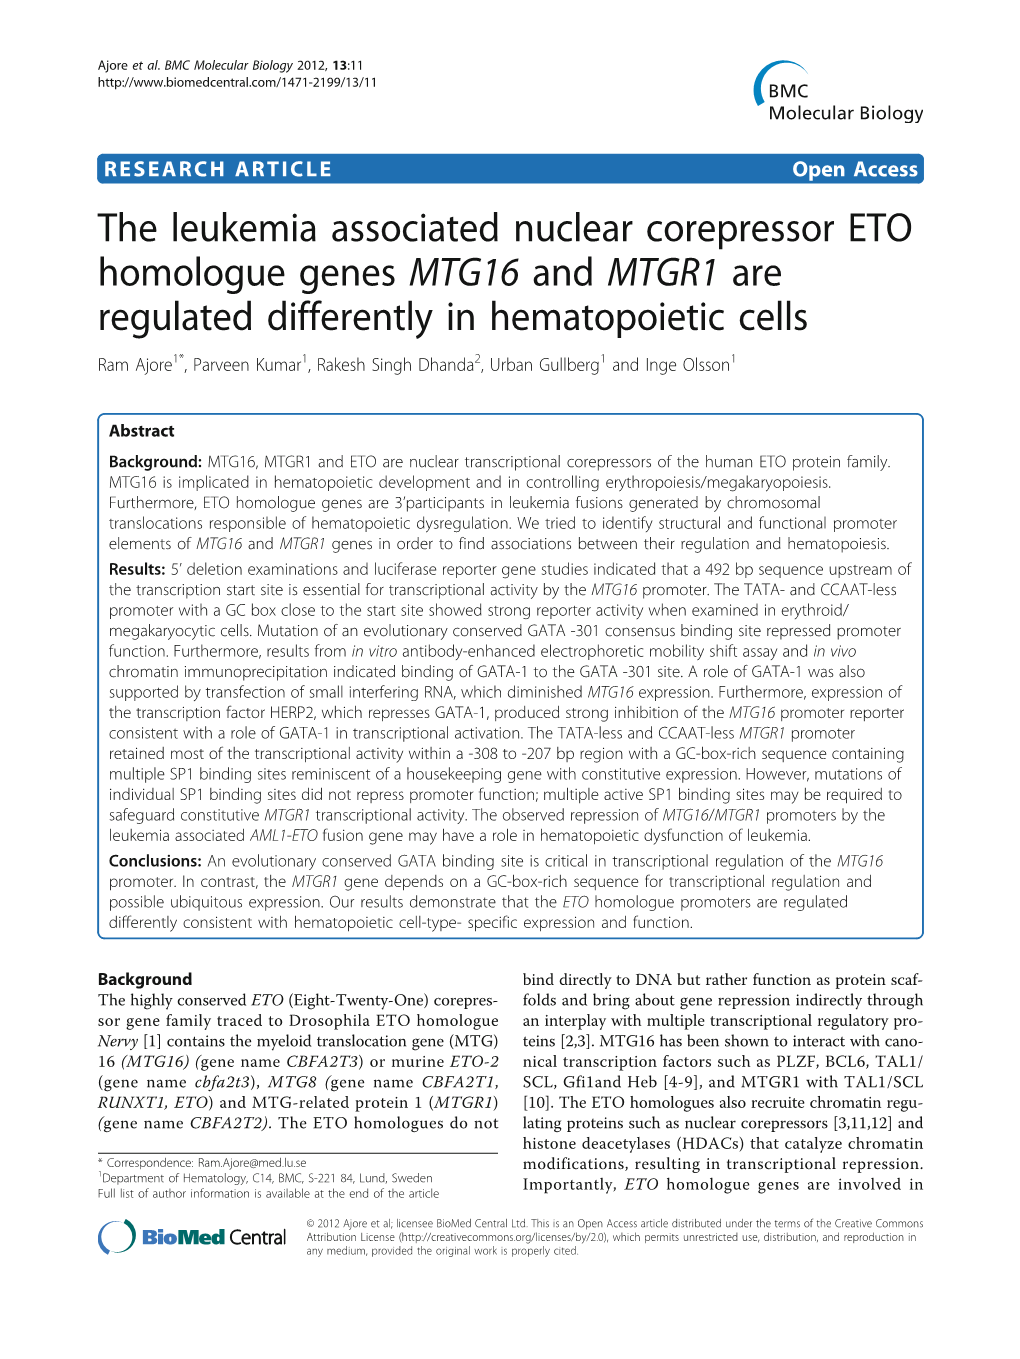 The Leukemia Associated Nuclear Corepressor ETO Homologue Genes MTG16 and MTGR1 Are Regulated Differently in Hematopoietic Cells